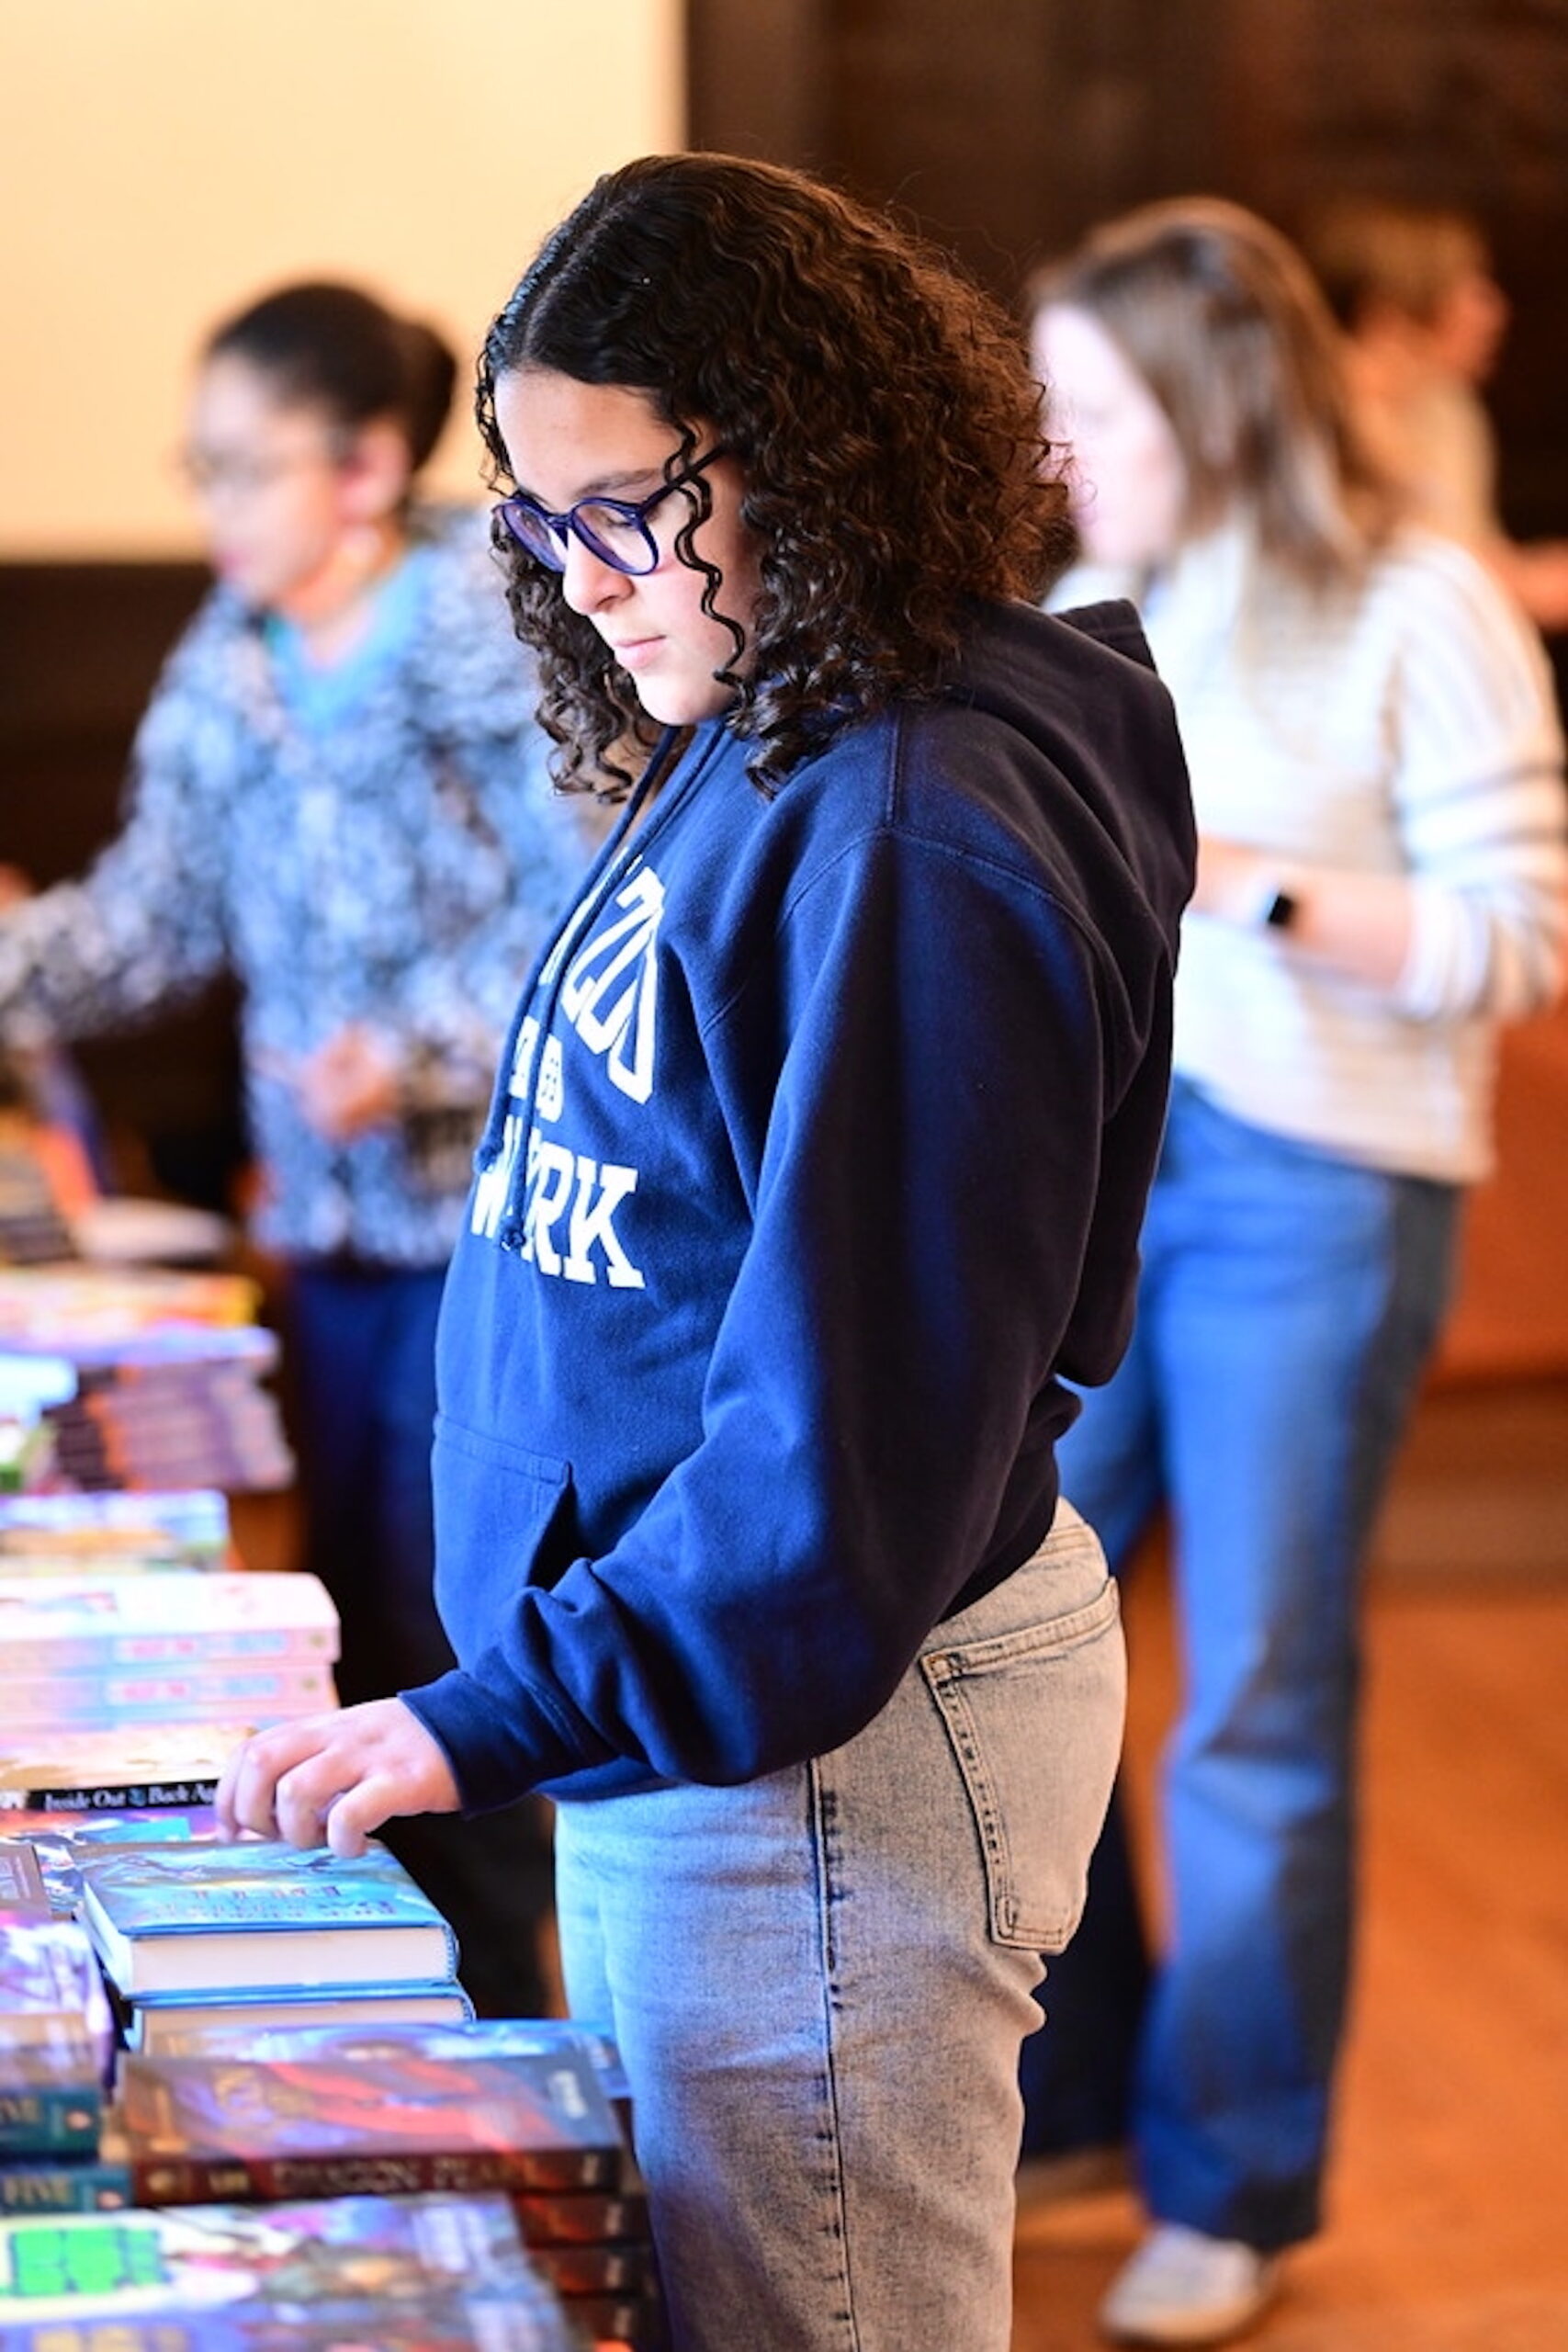 Student browses for books at the Ethical Culture Book Fair.